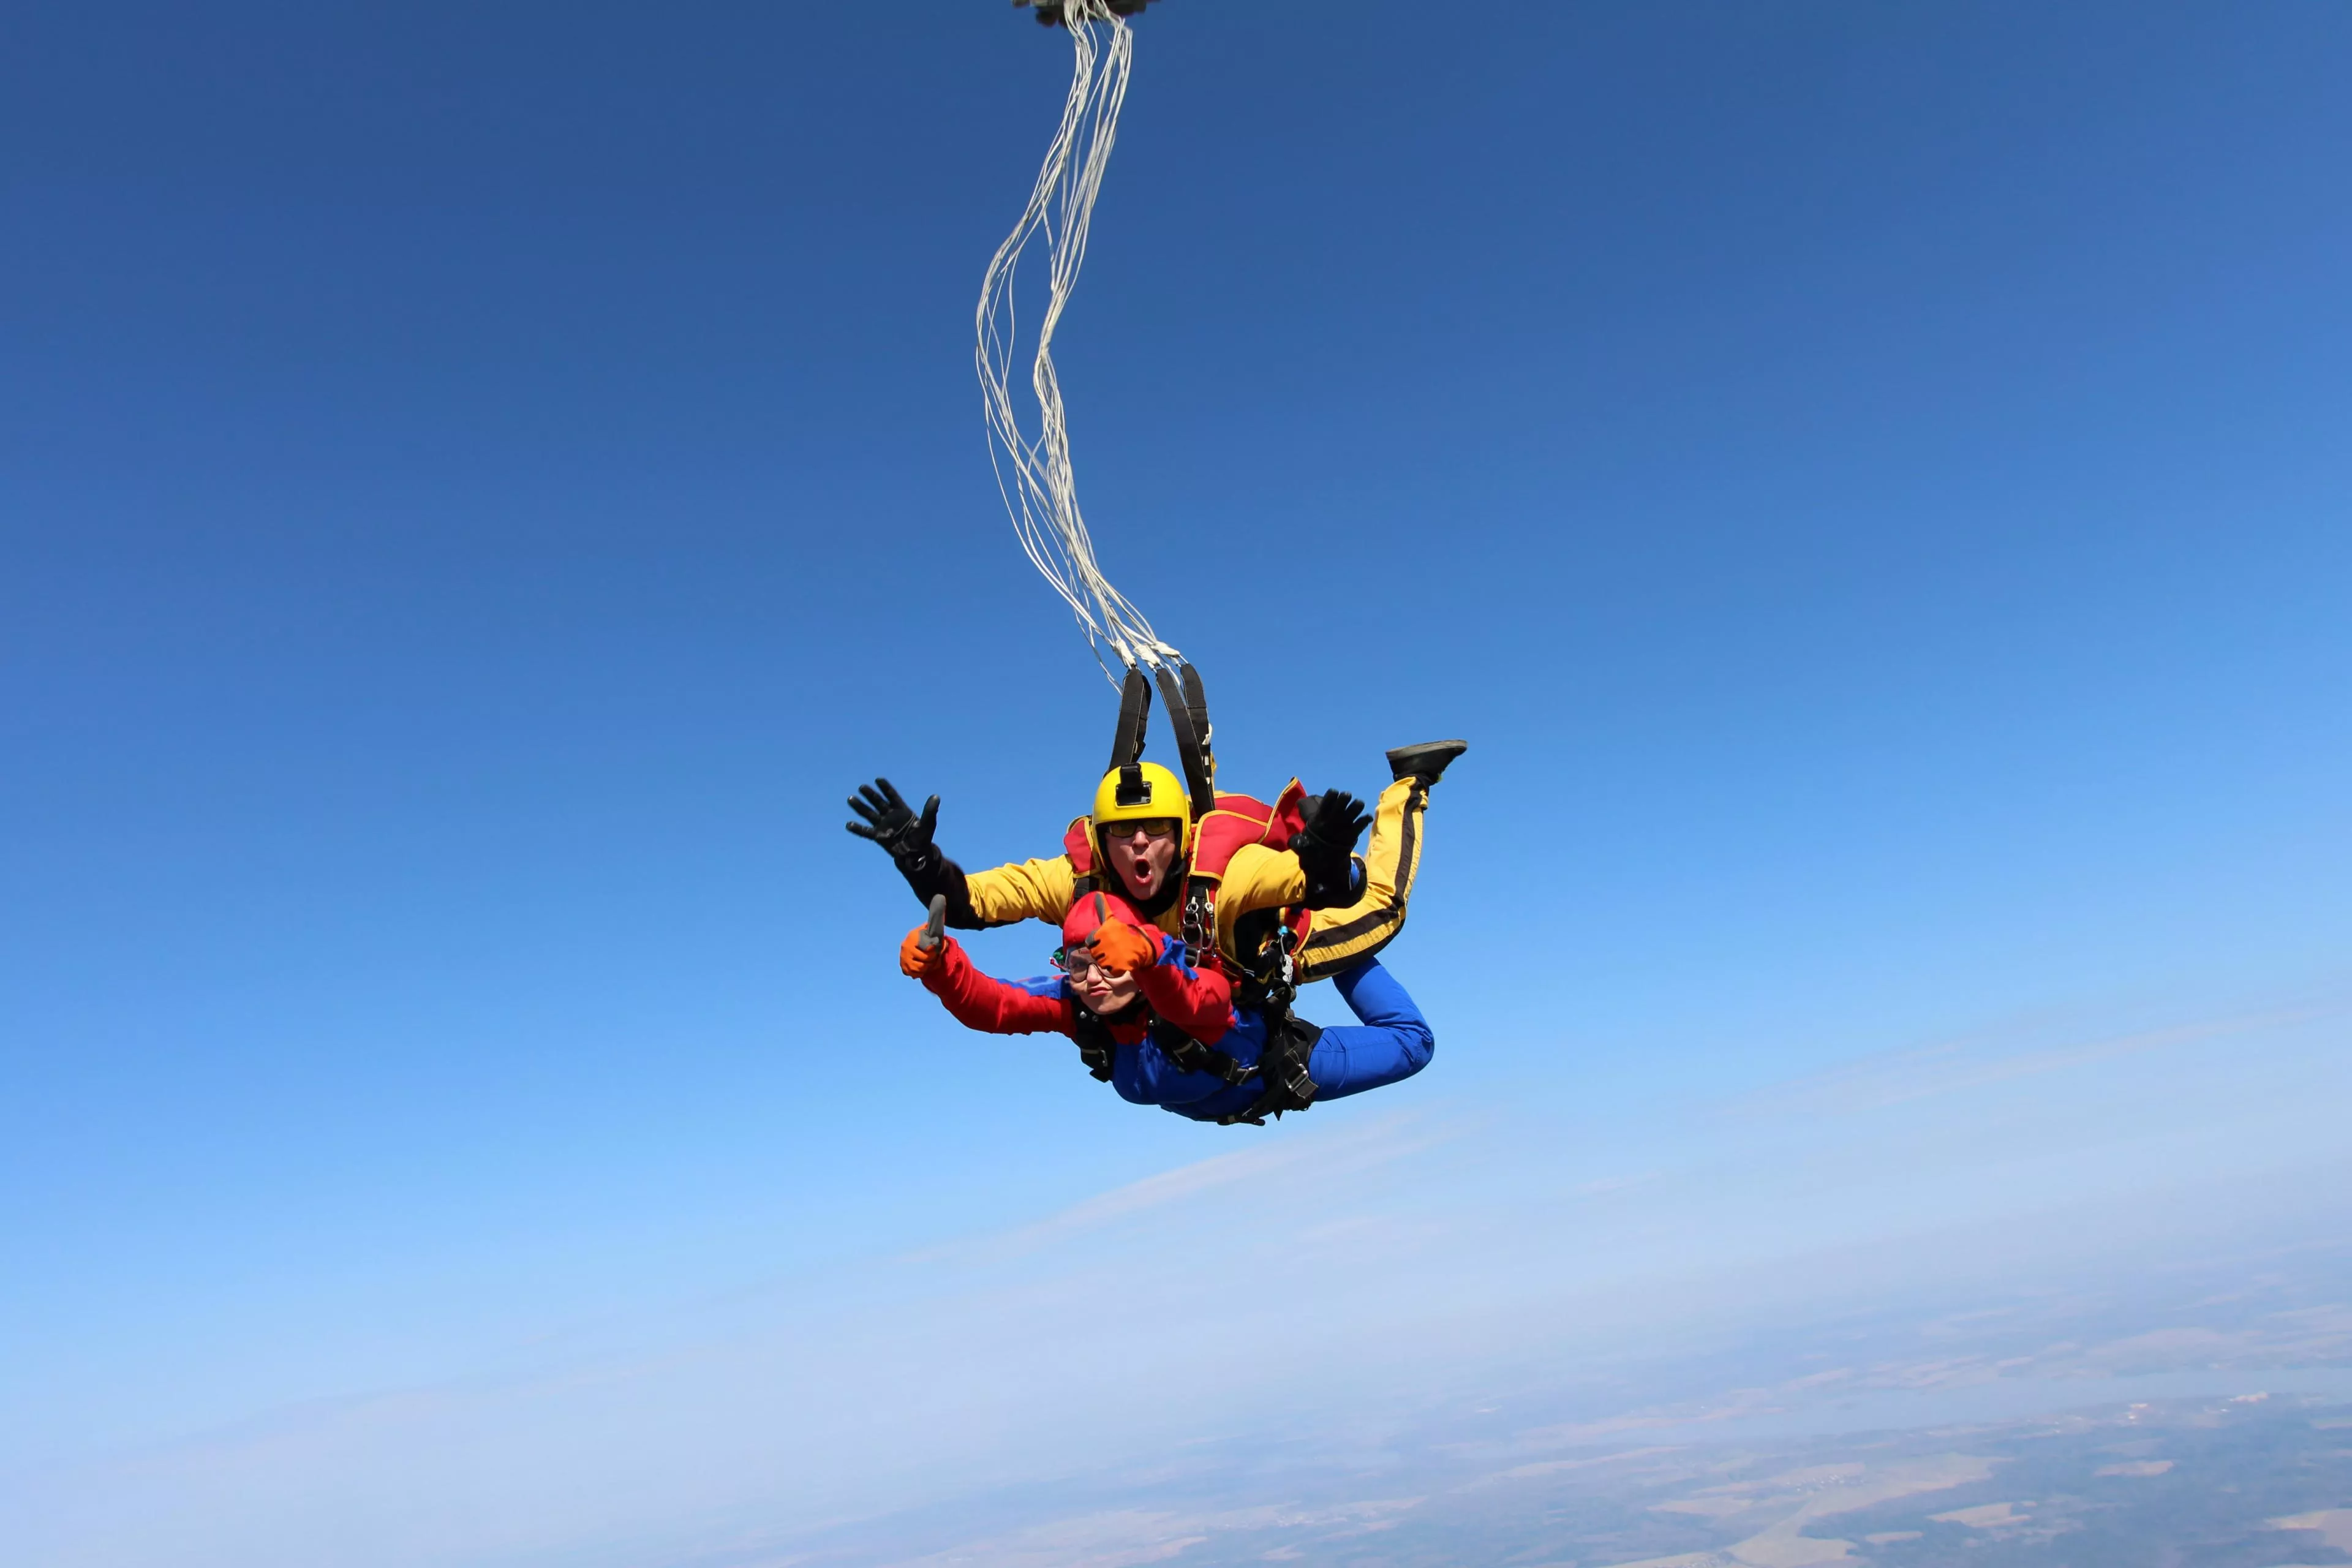 French School of Skydiving Lille Bondues in France, Europe | Skydiving - Rated 4.2